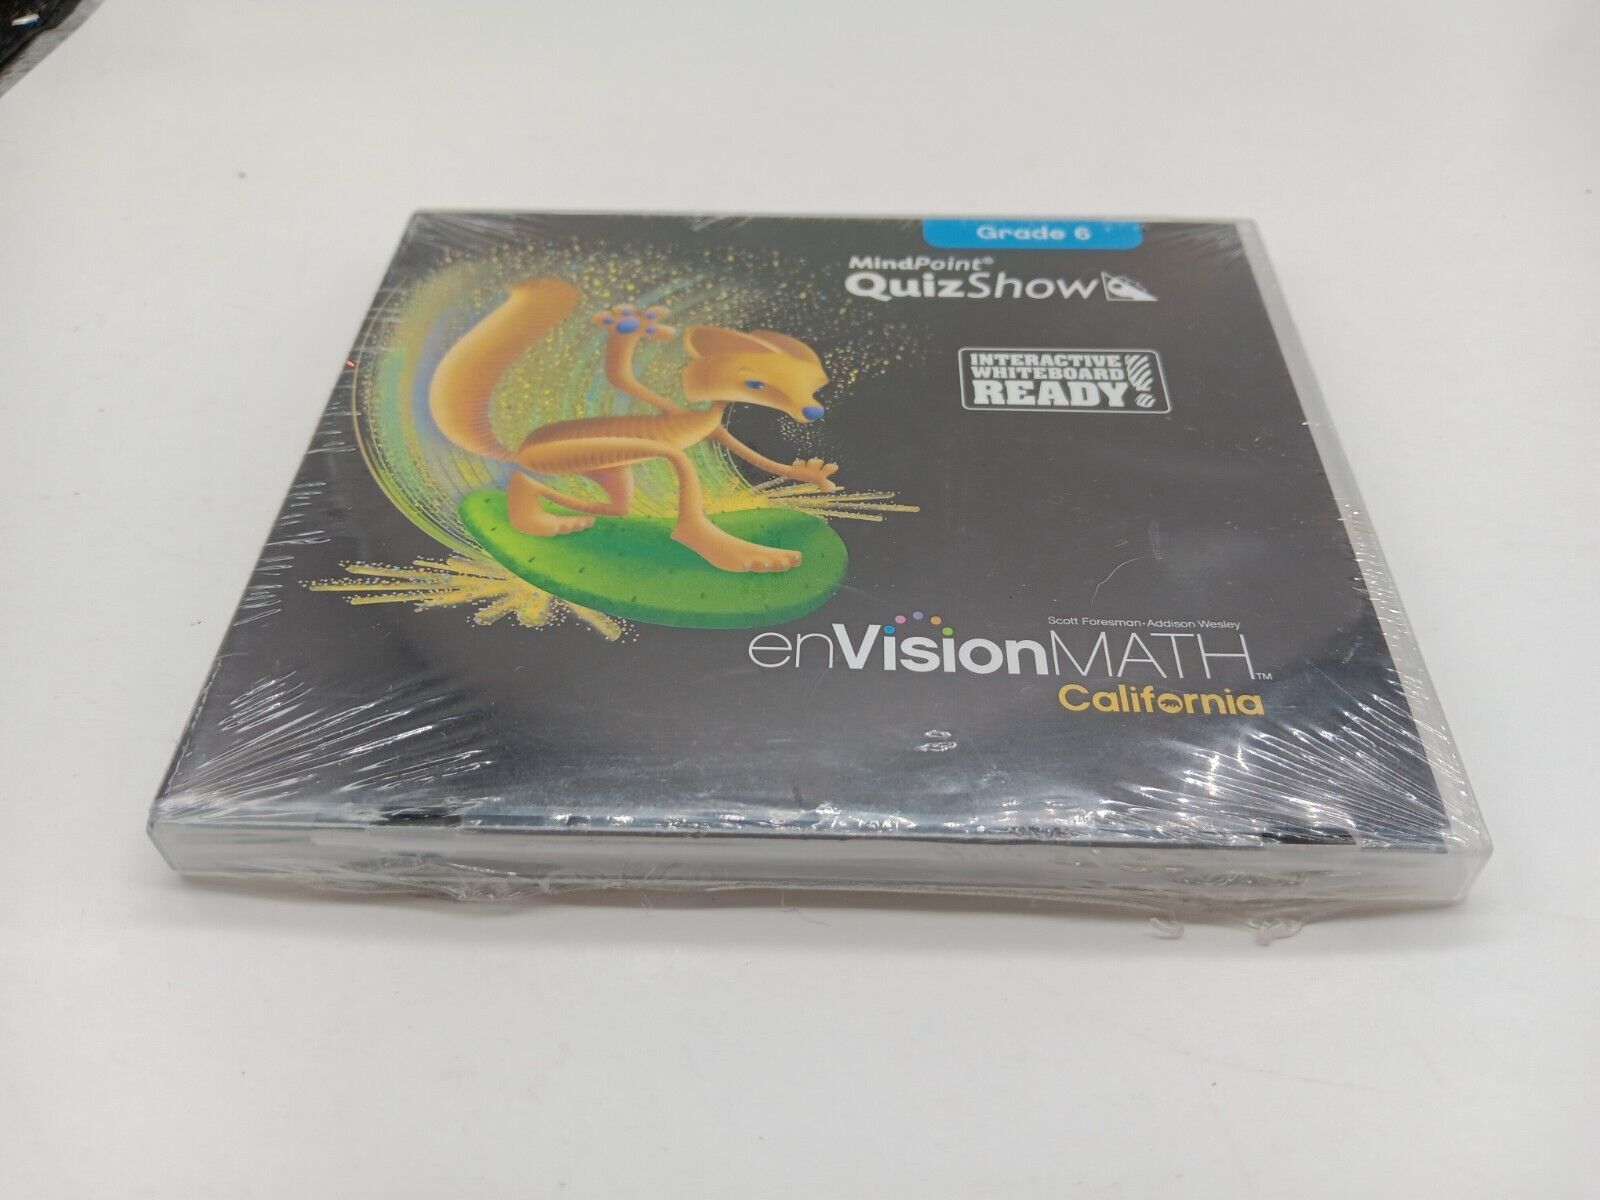 6th grade enVision Math California MindPoint QuizShow sealed CD 